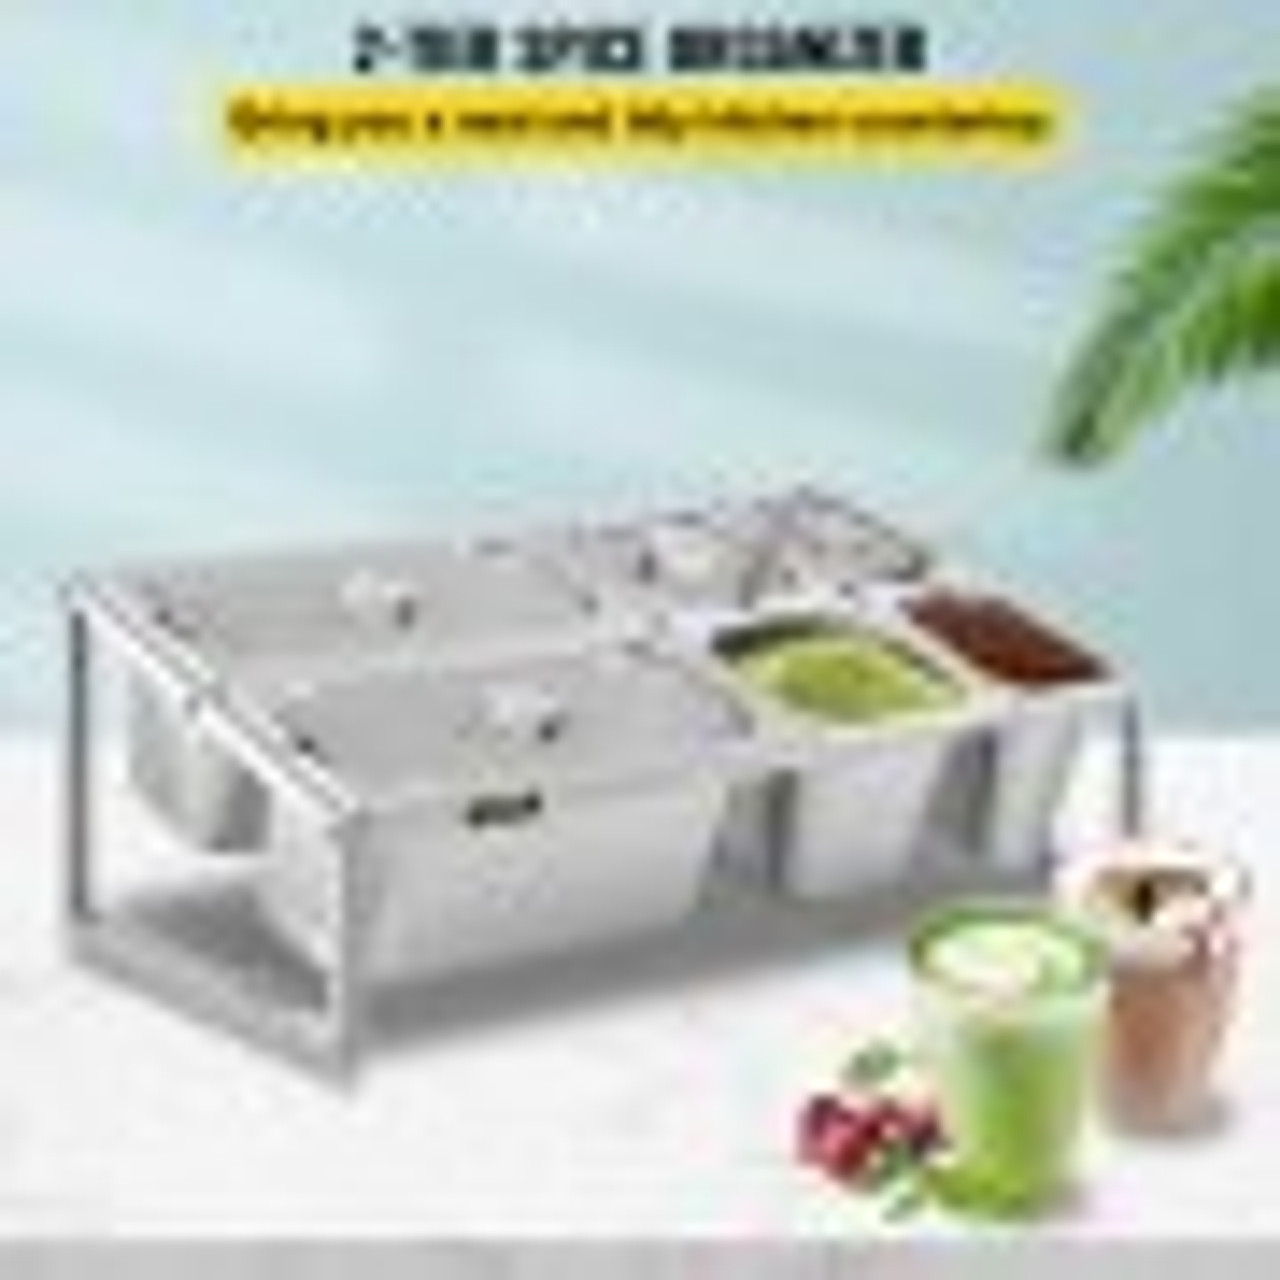 Expandable Spice Rack, 13.8"-23.6" Adjustable, 2-Tier Stainless Steel Organizer Shelf with 2 1/9 Pans 2 1/6 Pans 2 1/3 Pans 6 Ladles, Countertop Inclined Holder for Sauce Ingredients Fruits